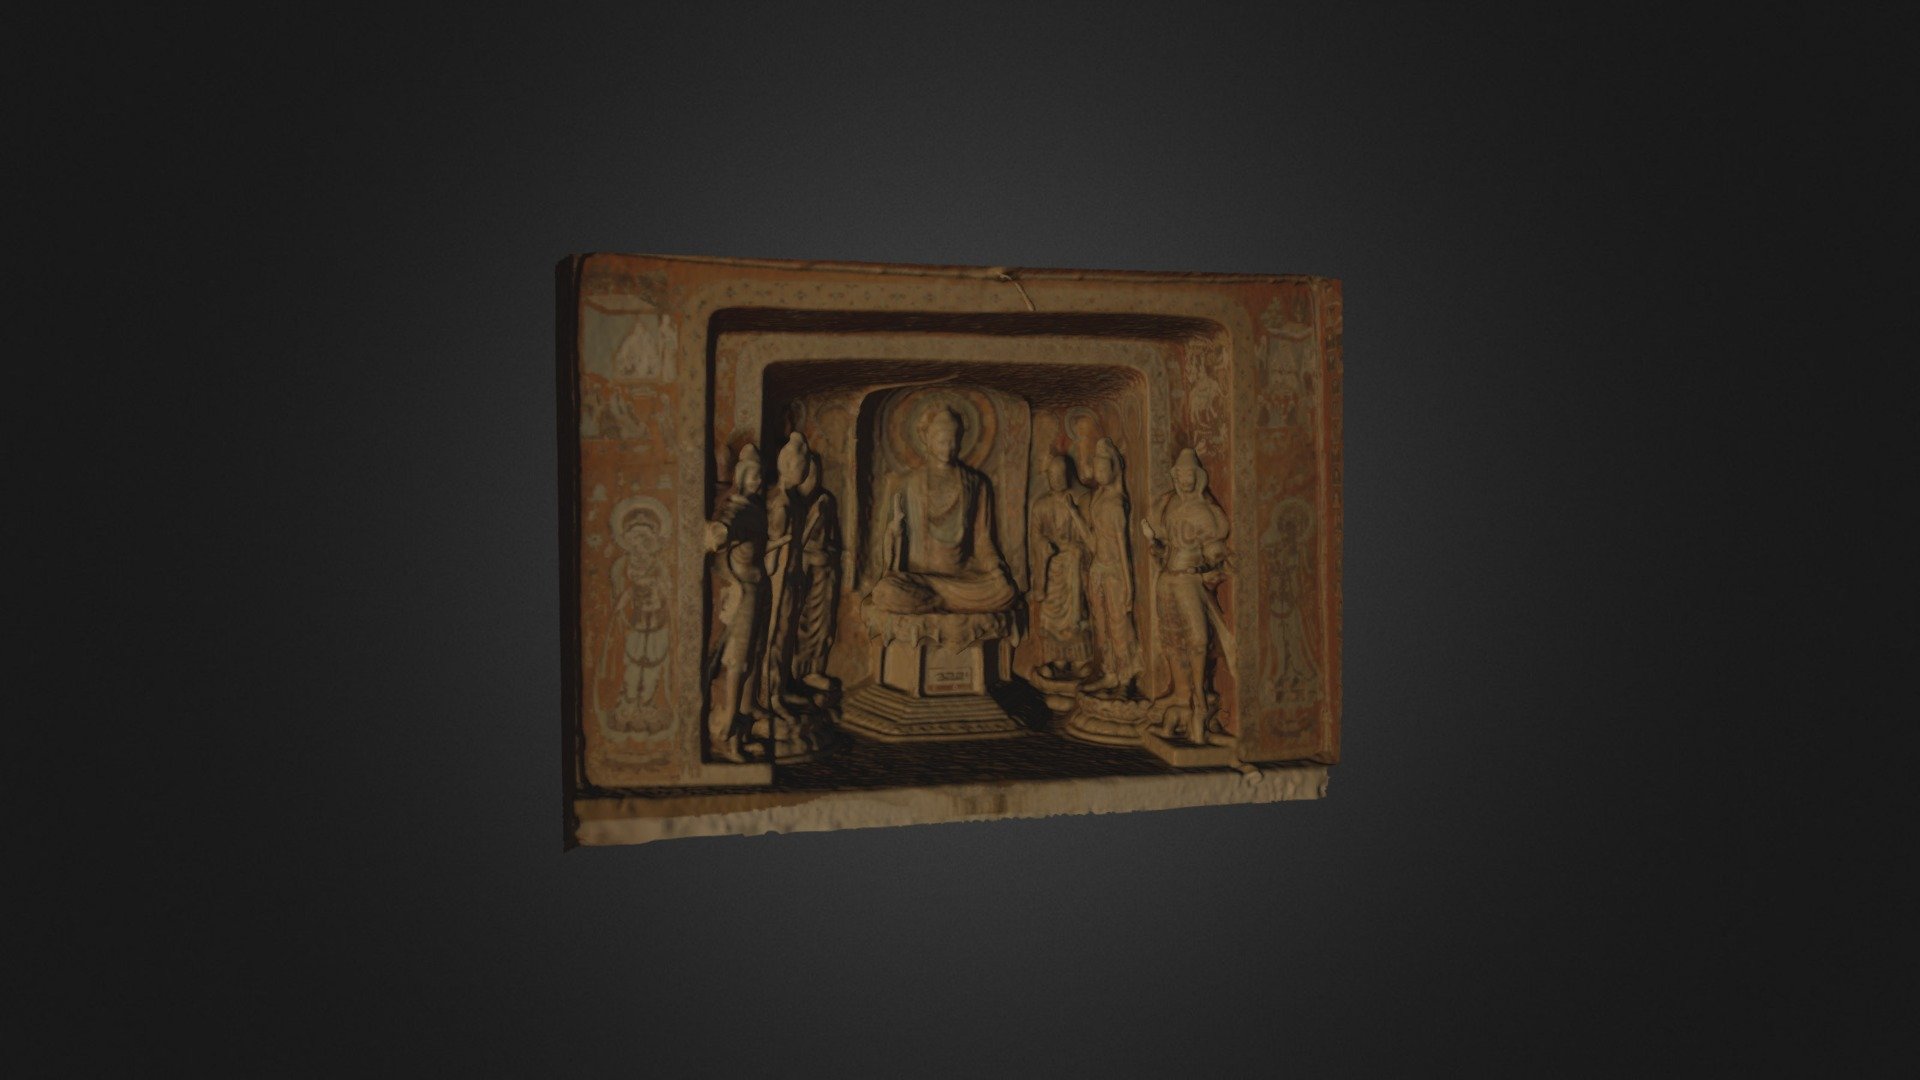 3D model created with ARC3D and MeshLab - dunhuang.ply - 3D model by paul.konijn 3d model